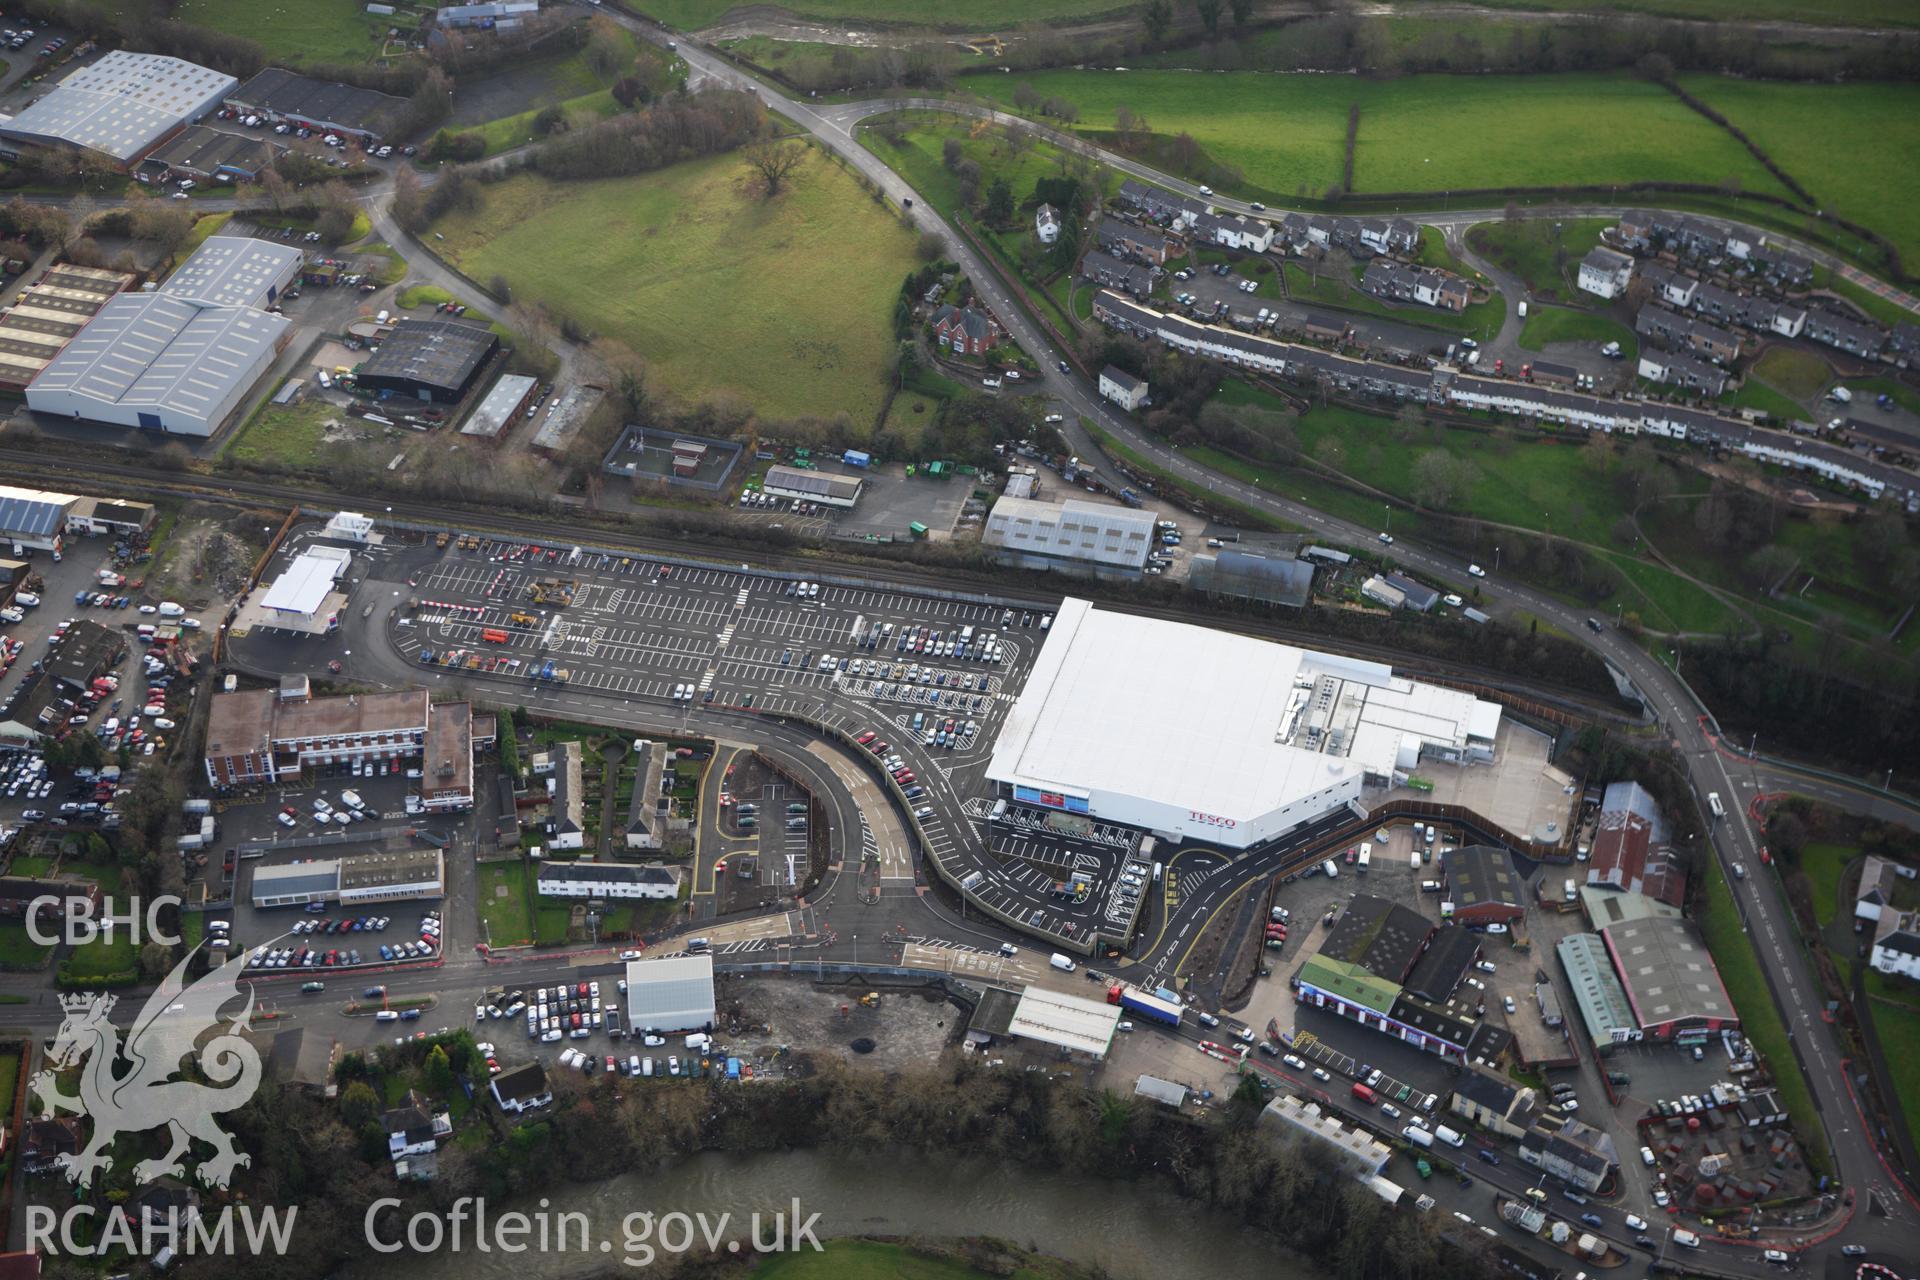 RCAHMW colour oblique aerial photograph of Tesco Store, Pool Road, Newtown. Taken on 10 December 2009 by Toby Driver